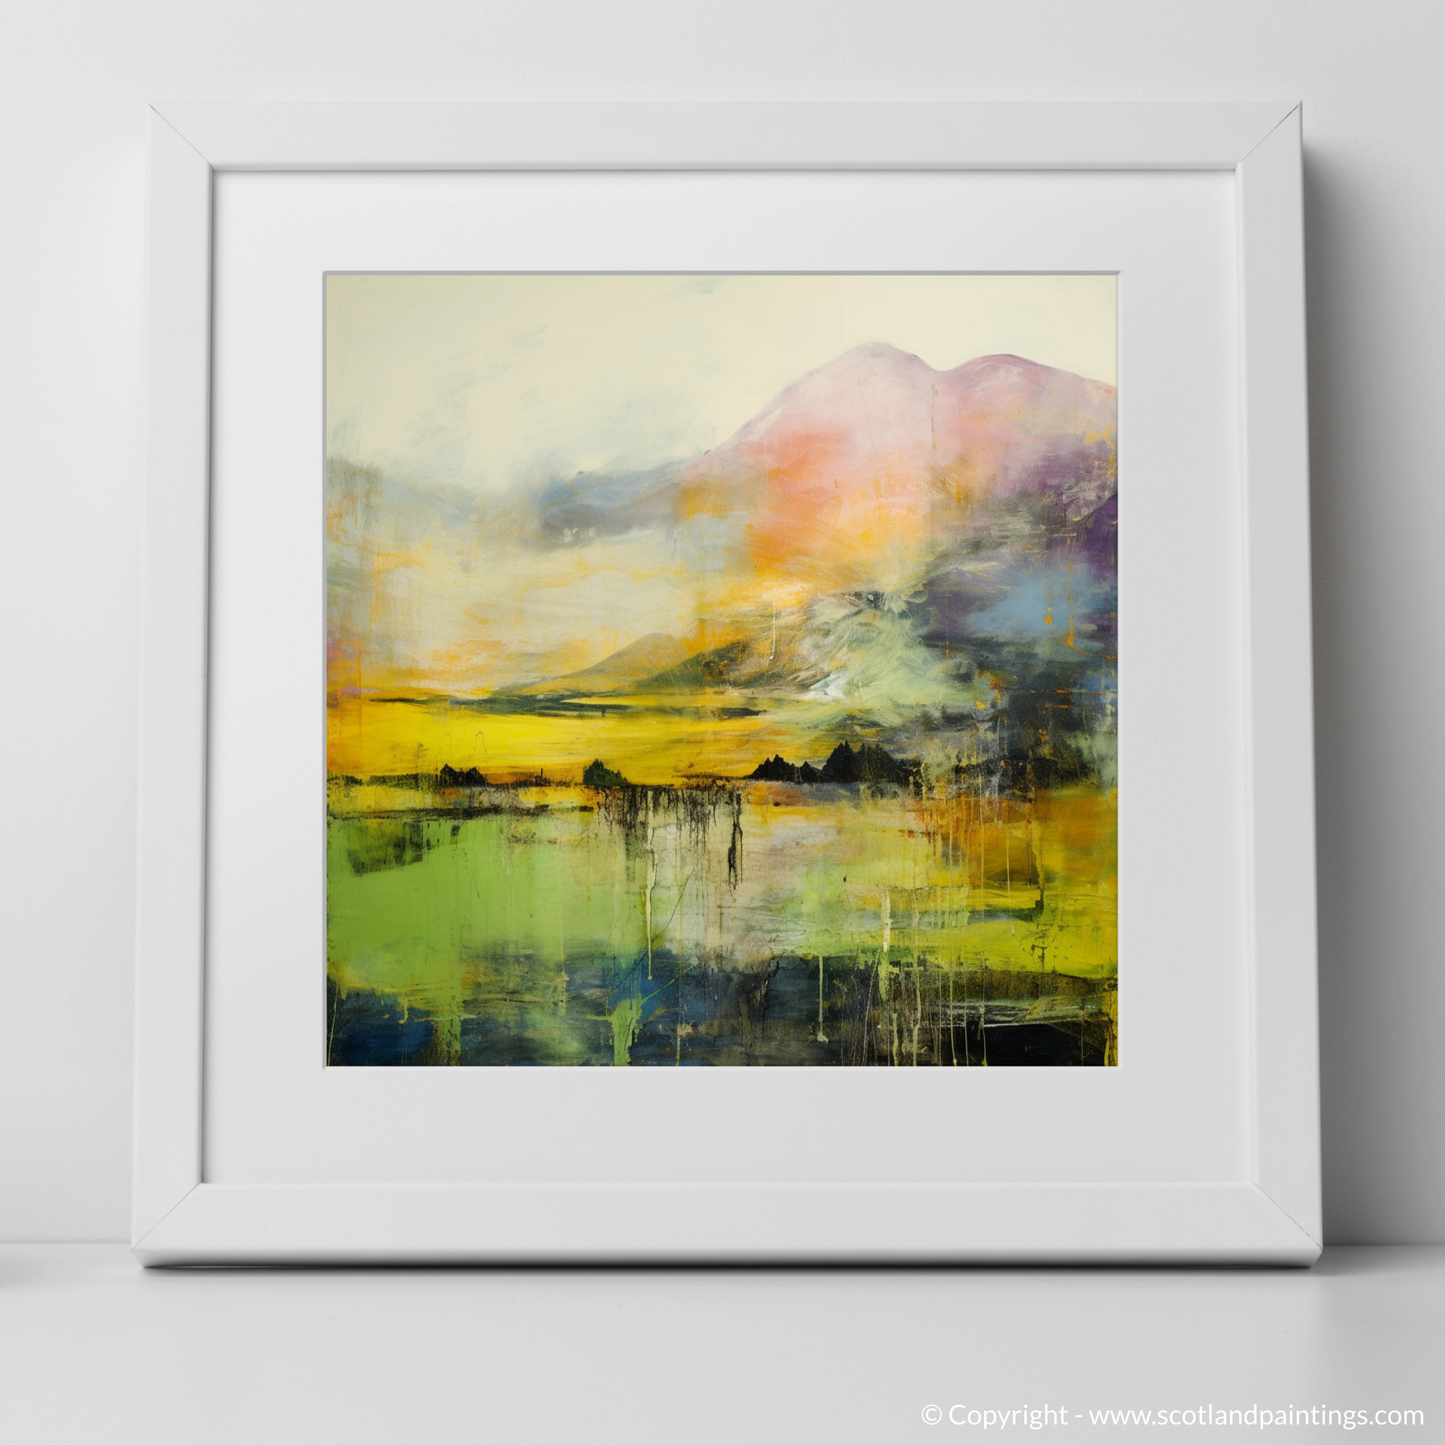 Art Print of Glen Orchy, Argyll and Bute with a white frame